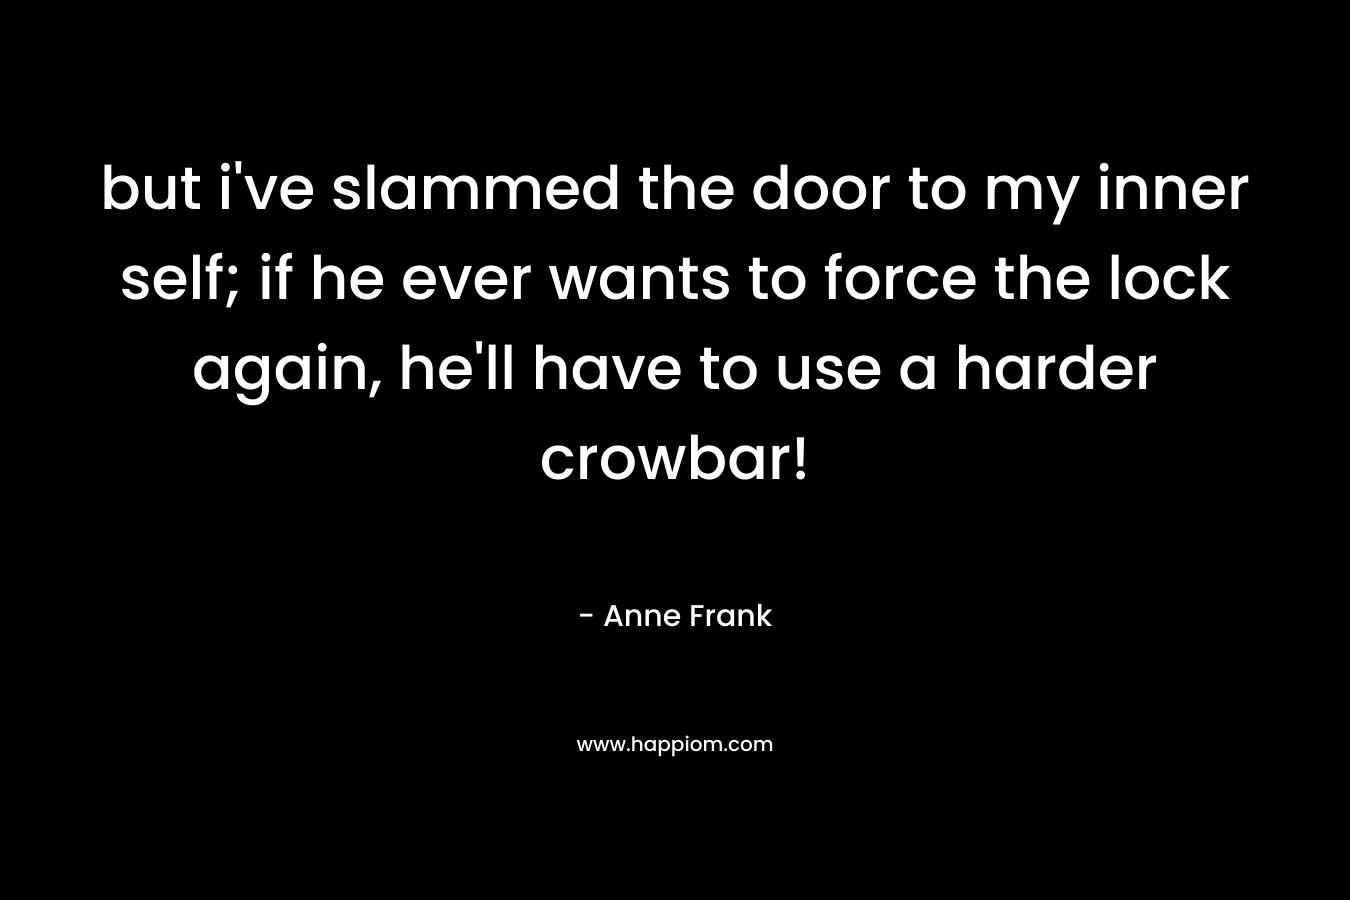 but i’ve slammed the door to my inner self; if he ever wants to force the lock again, he’ll have to use a harder crowbar! – Anne Frank